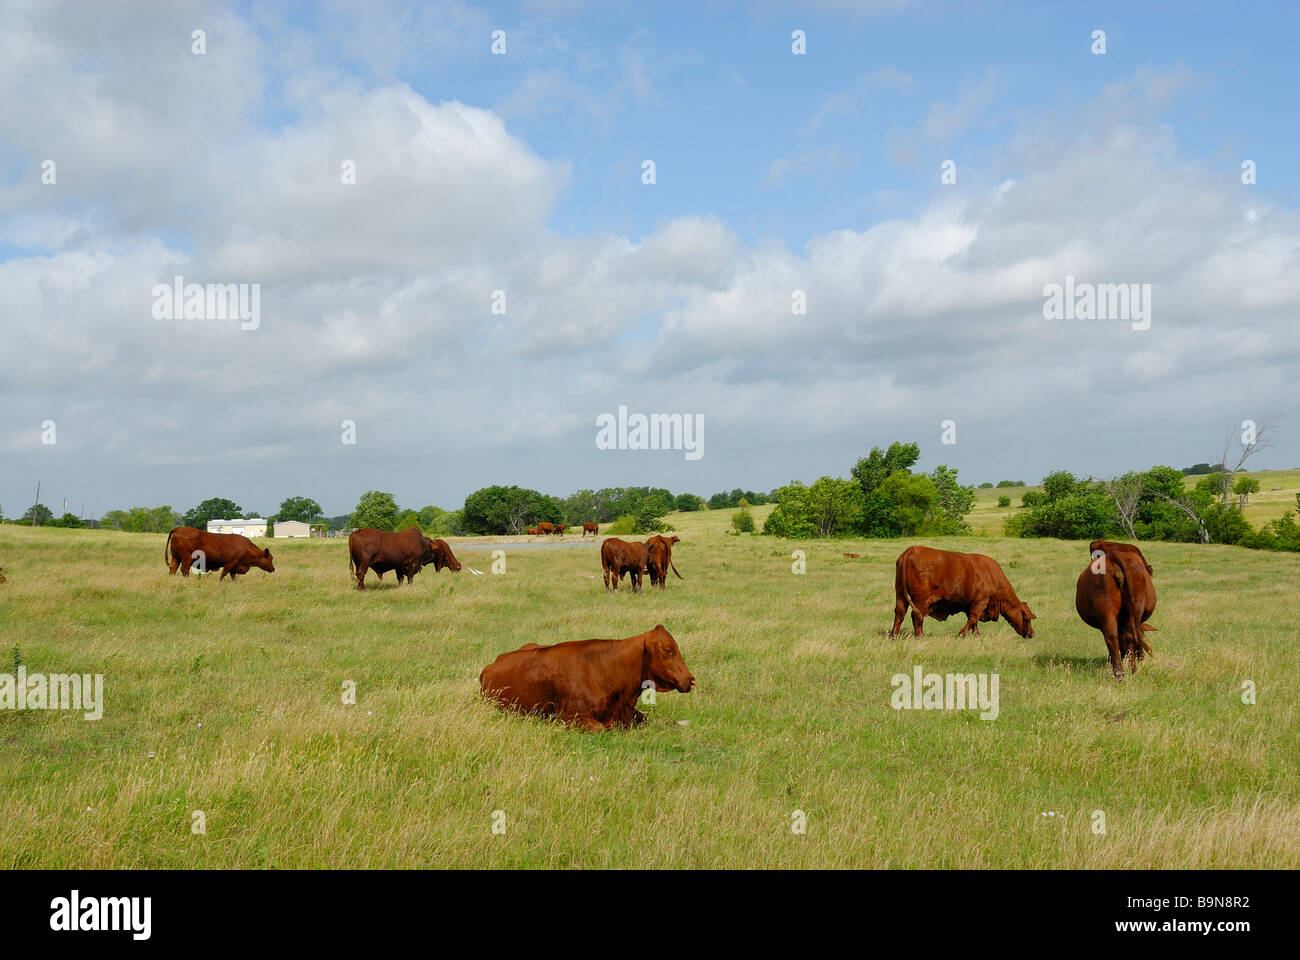 Cattle grazing on grass in an open field with birds, This field is in a rural countryside. Stock Photo